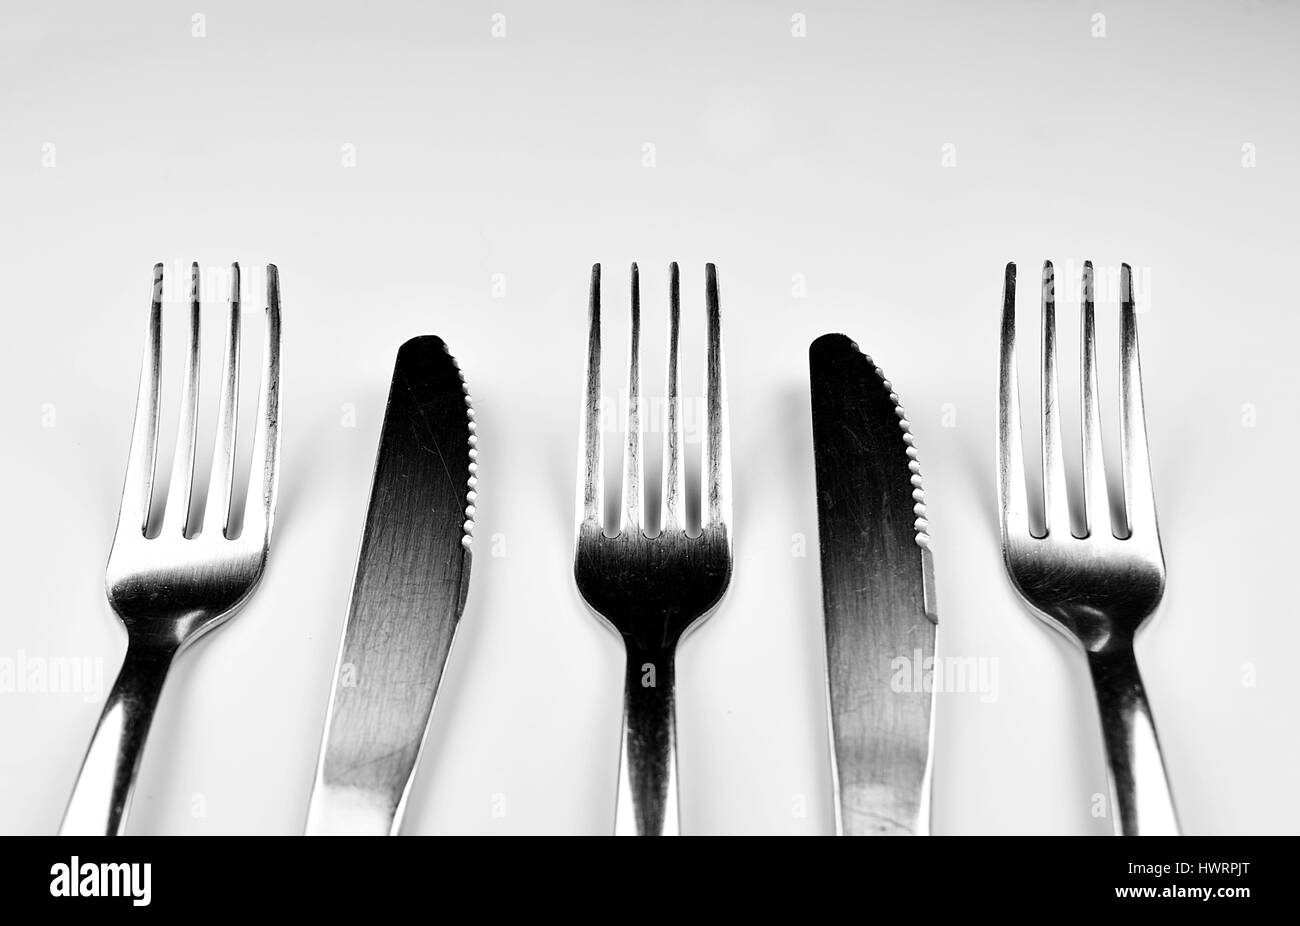 Forks and Knives isolated on bright background Stock Photo